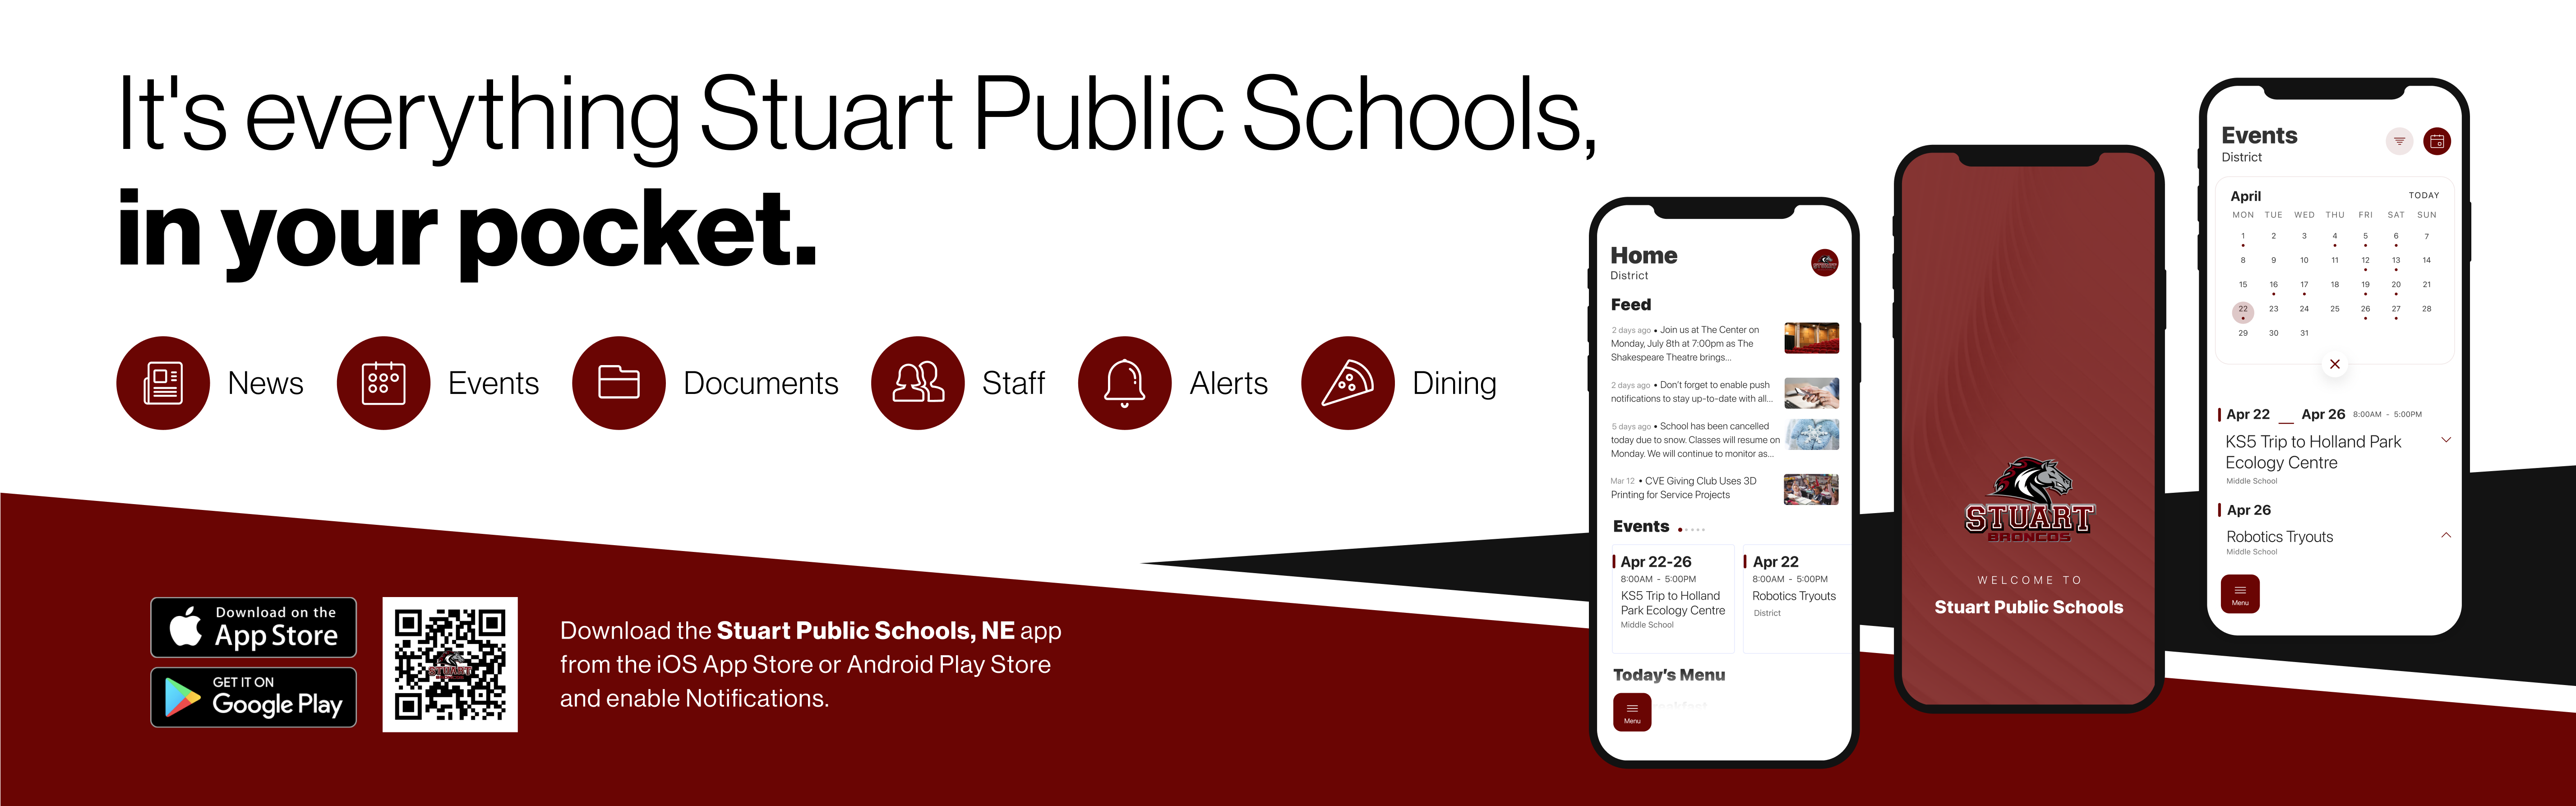 It’s everything Stuart Public Schools, in your pocket.